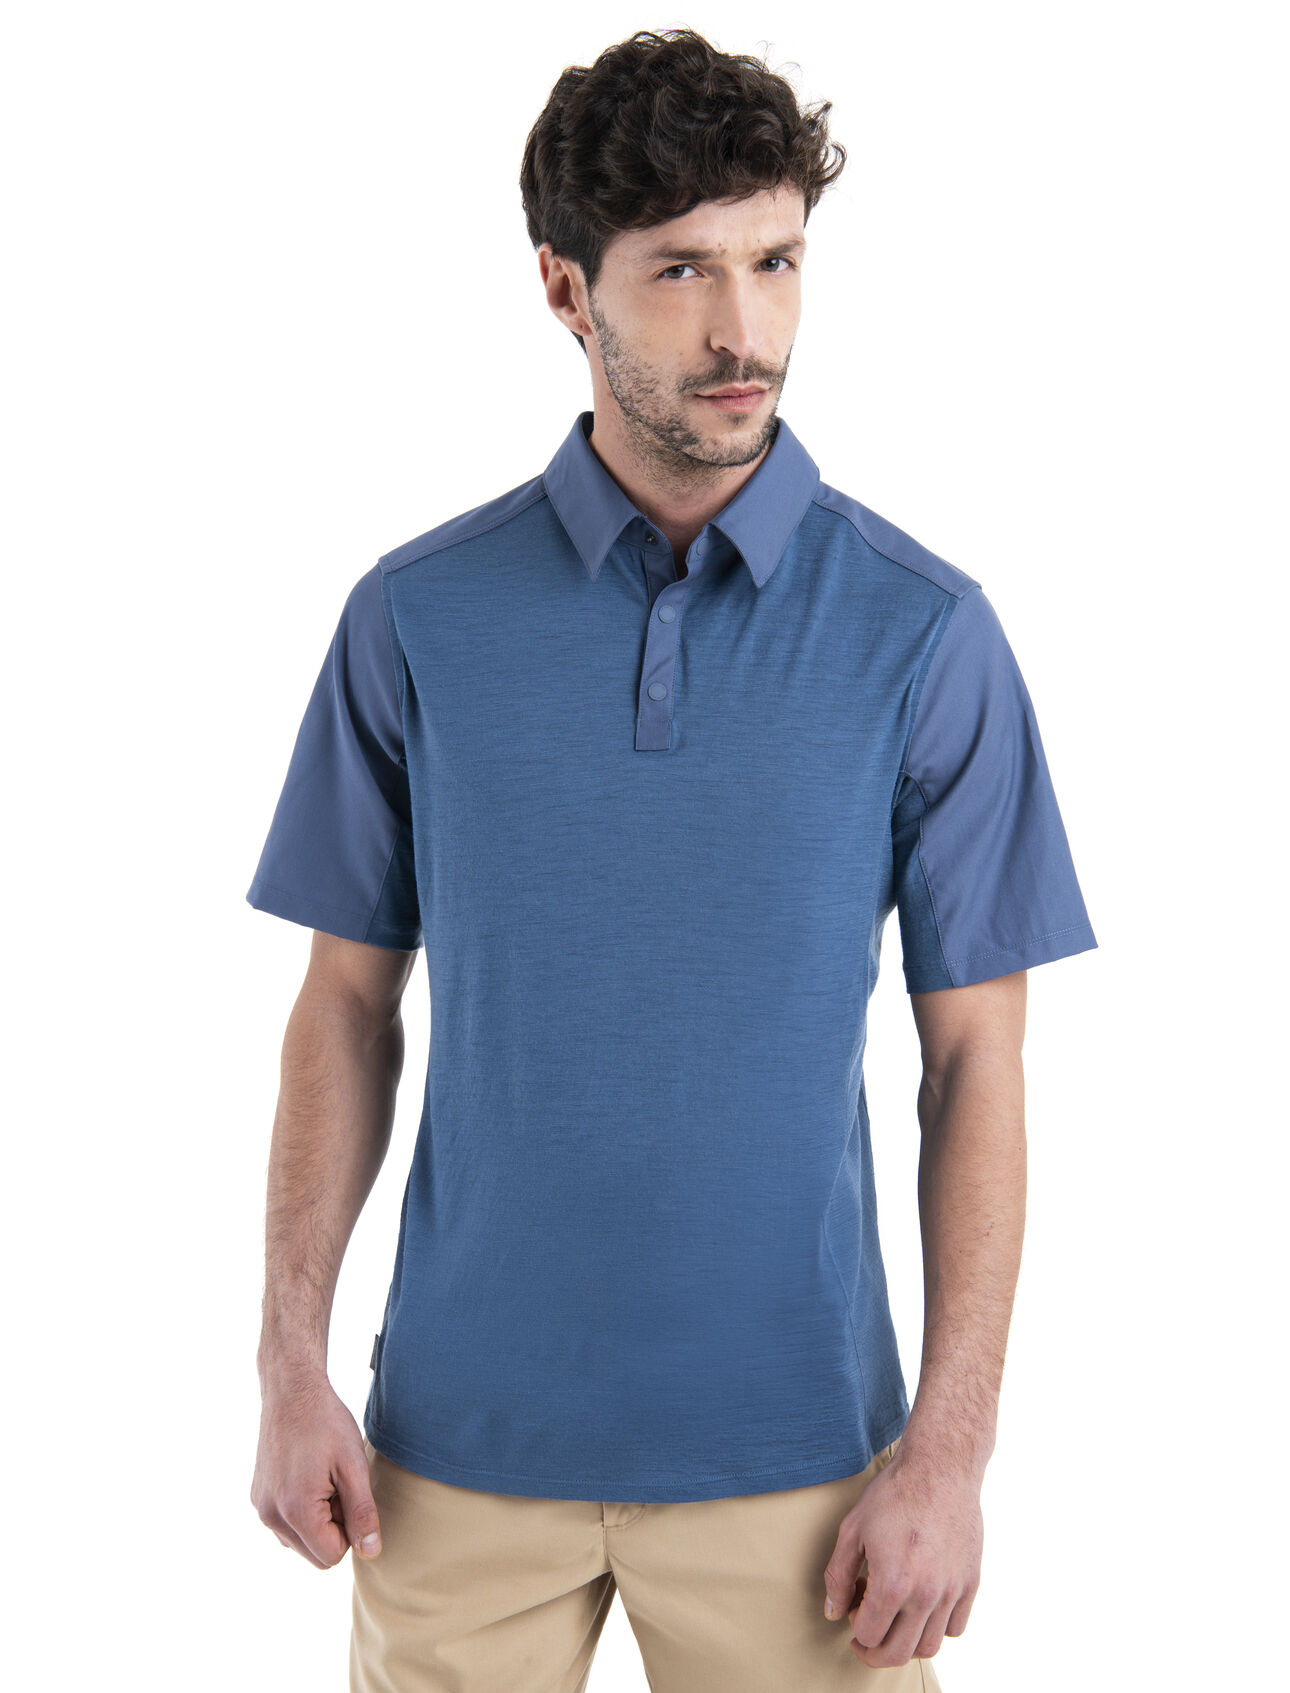 Mens Merino Hike Short Sleeve Top A lightweight and breathable merino shirt ideal for mountain adventures, the Hike Short Sleeve Top also provides the casual style for whatever comes after.